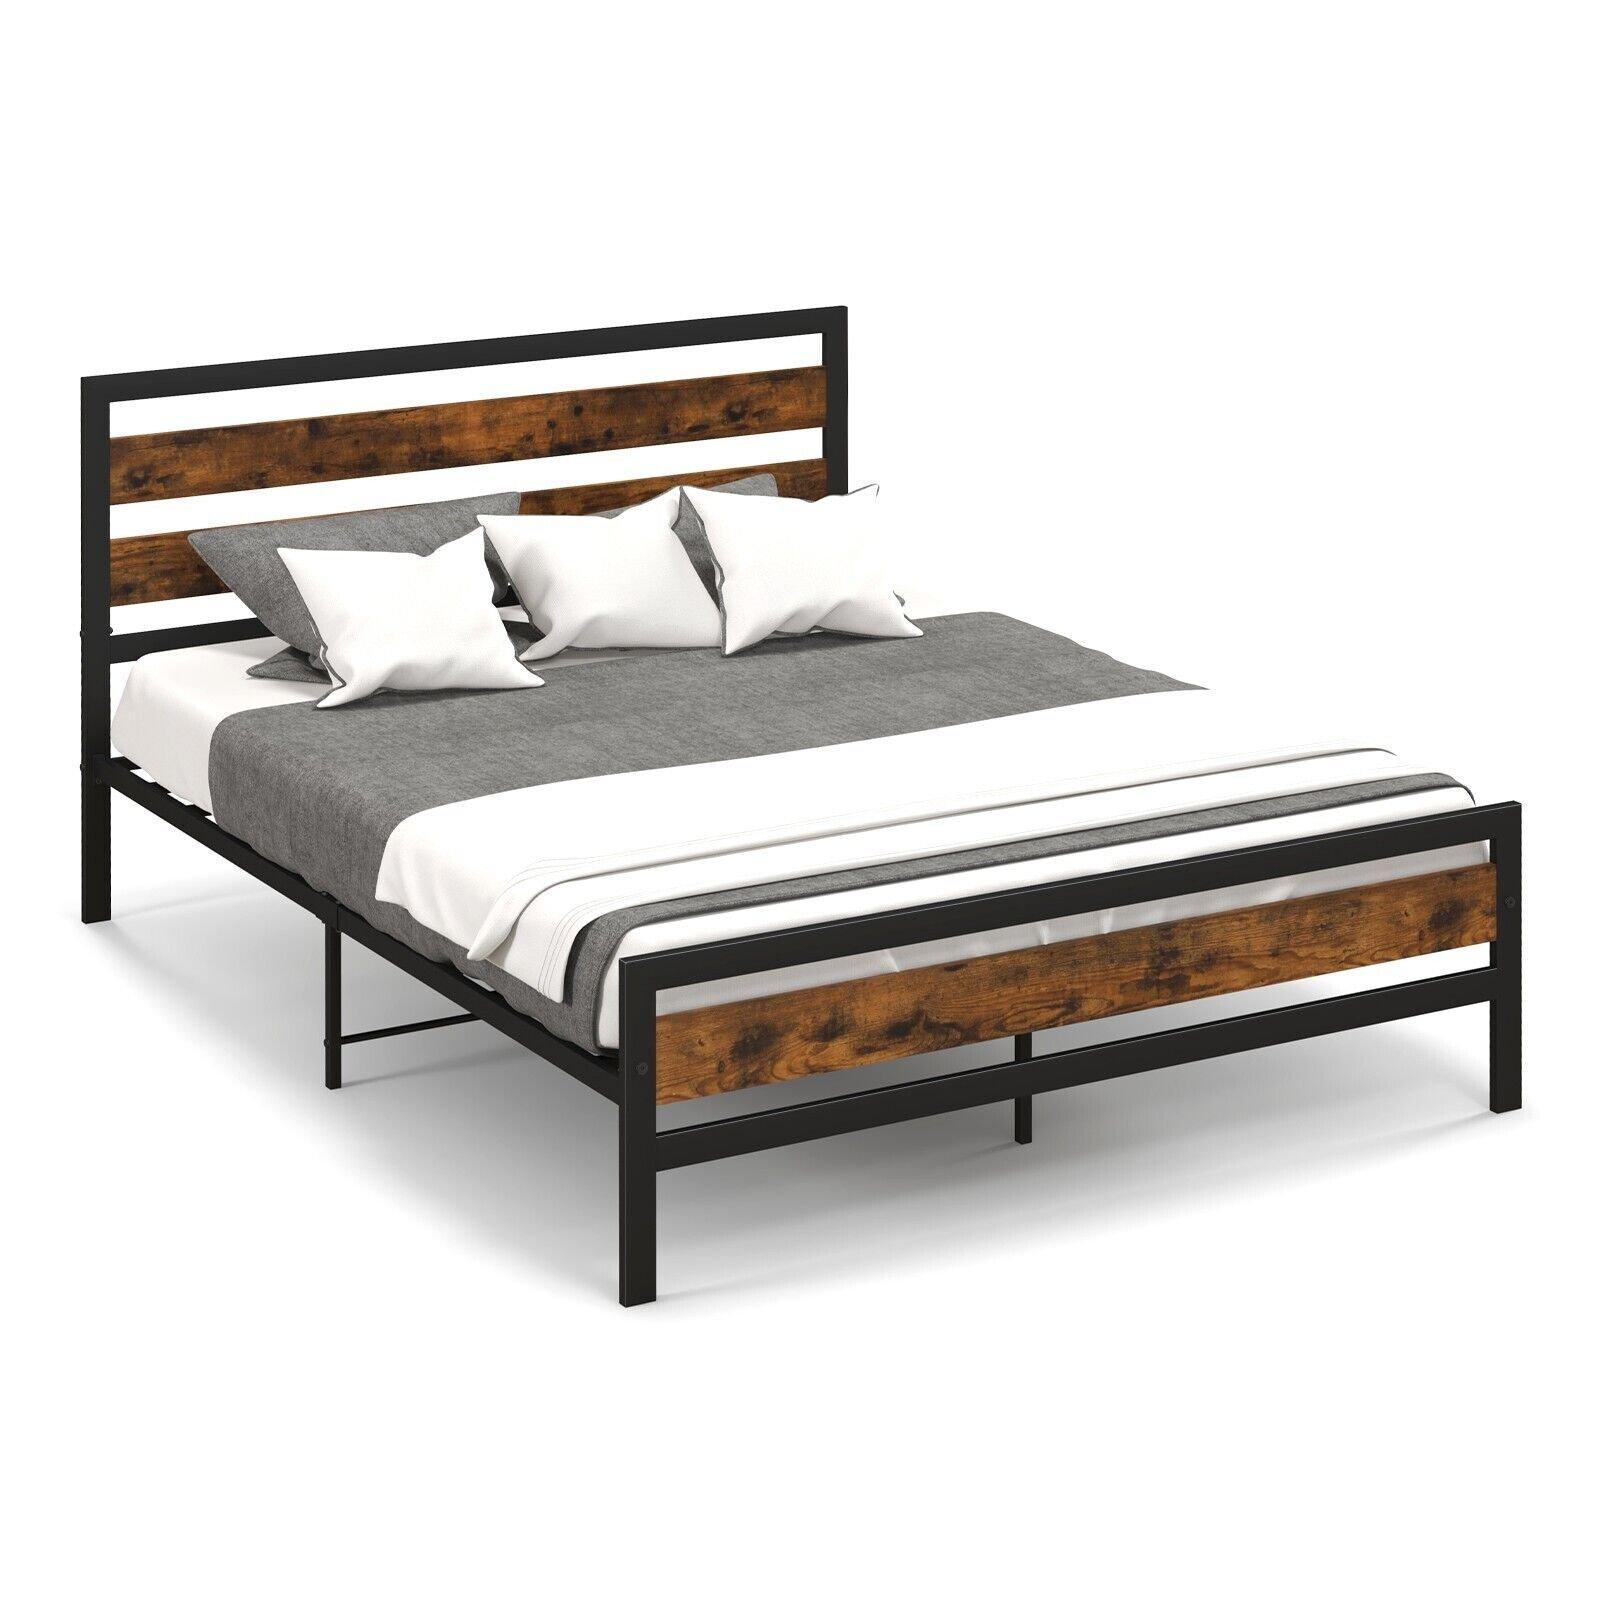 Metal Bed Frame King Size  Industrial Platform Bed with Headboard and Footboard